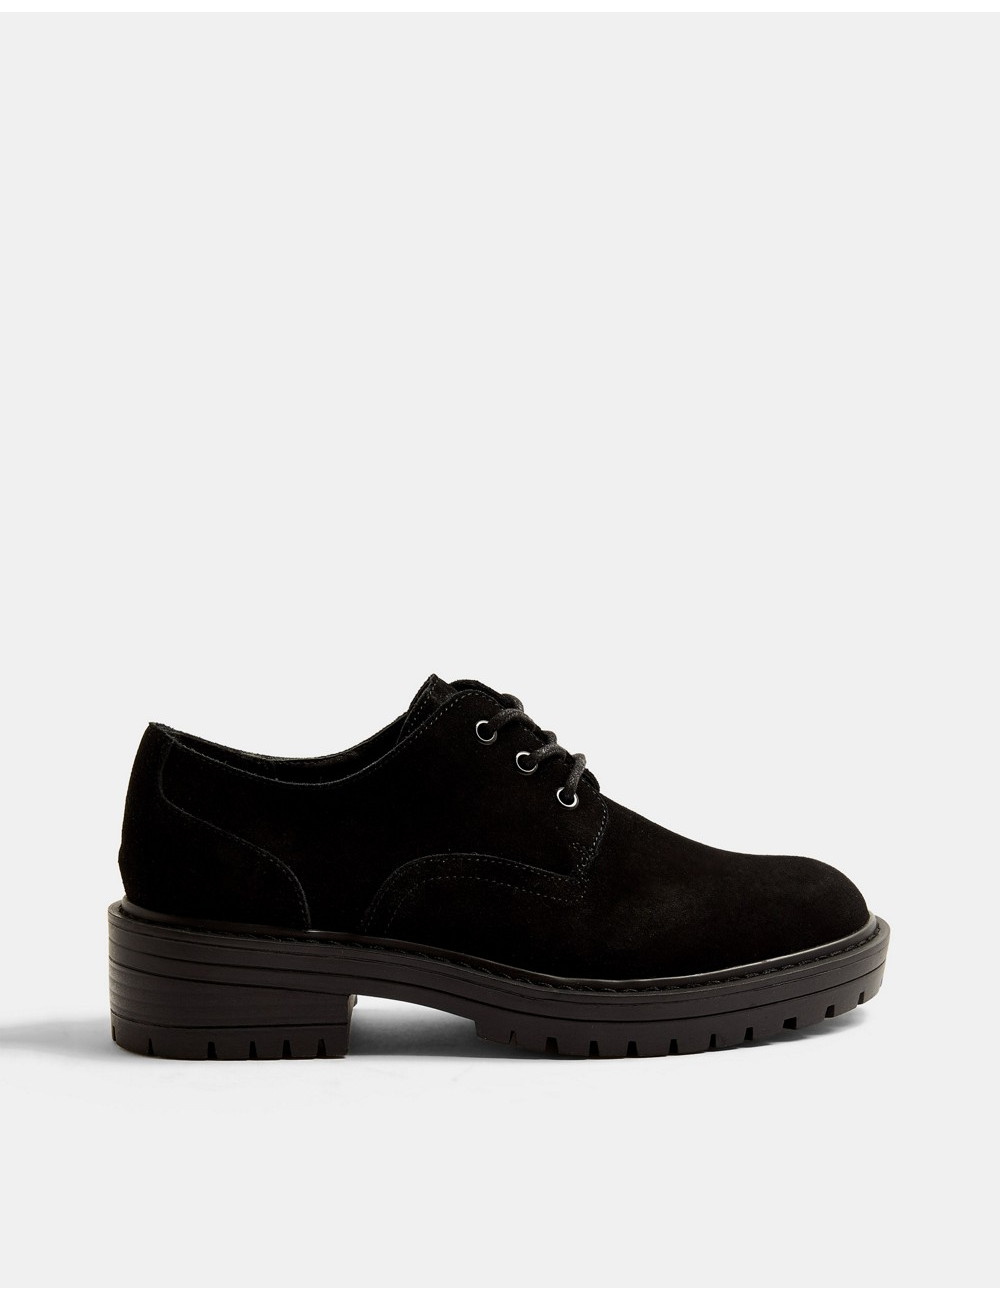 Topshop lace up loafers in...